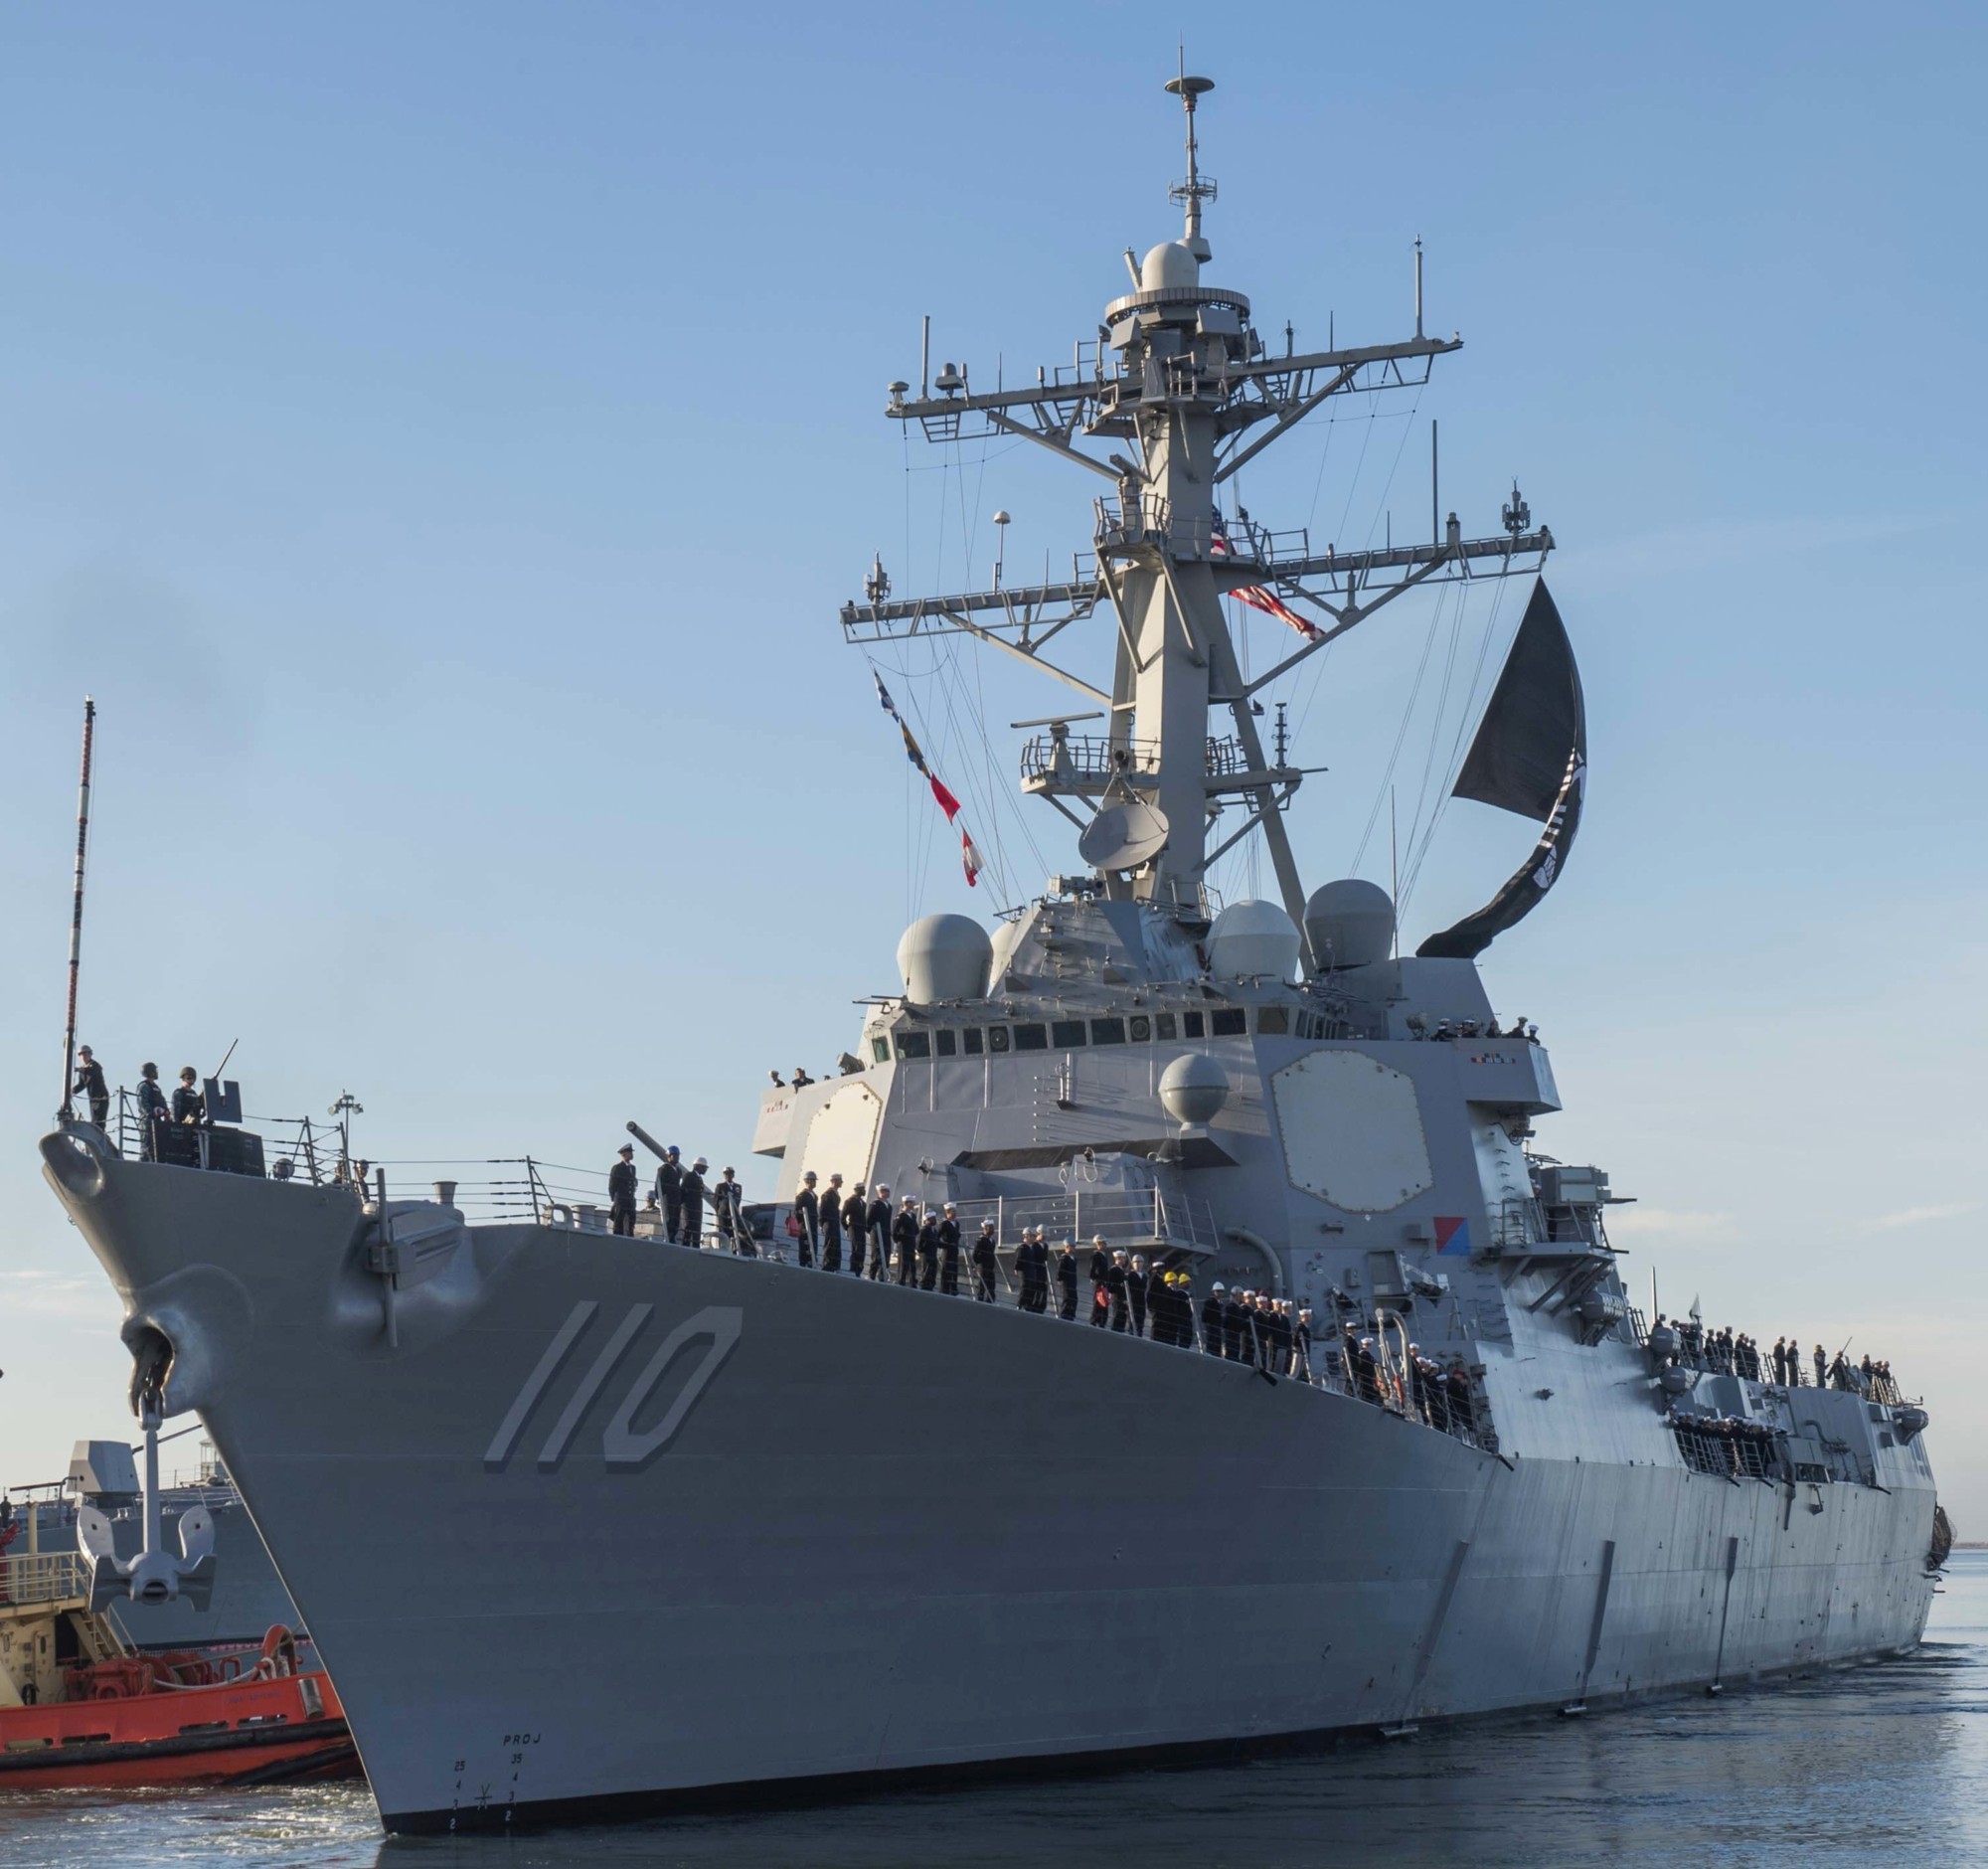 ddg-110 uss william p. lawrence arleigh burke class guided missile destroyer aegis us navy naval base san diego california 15